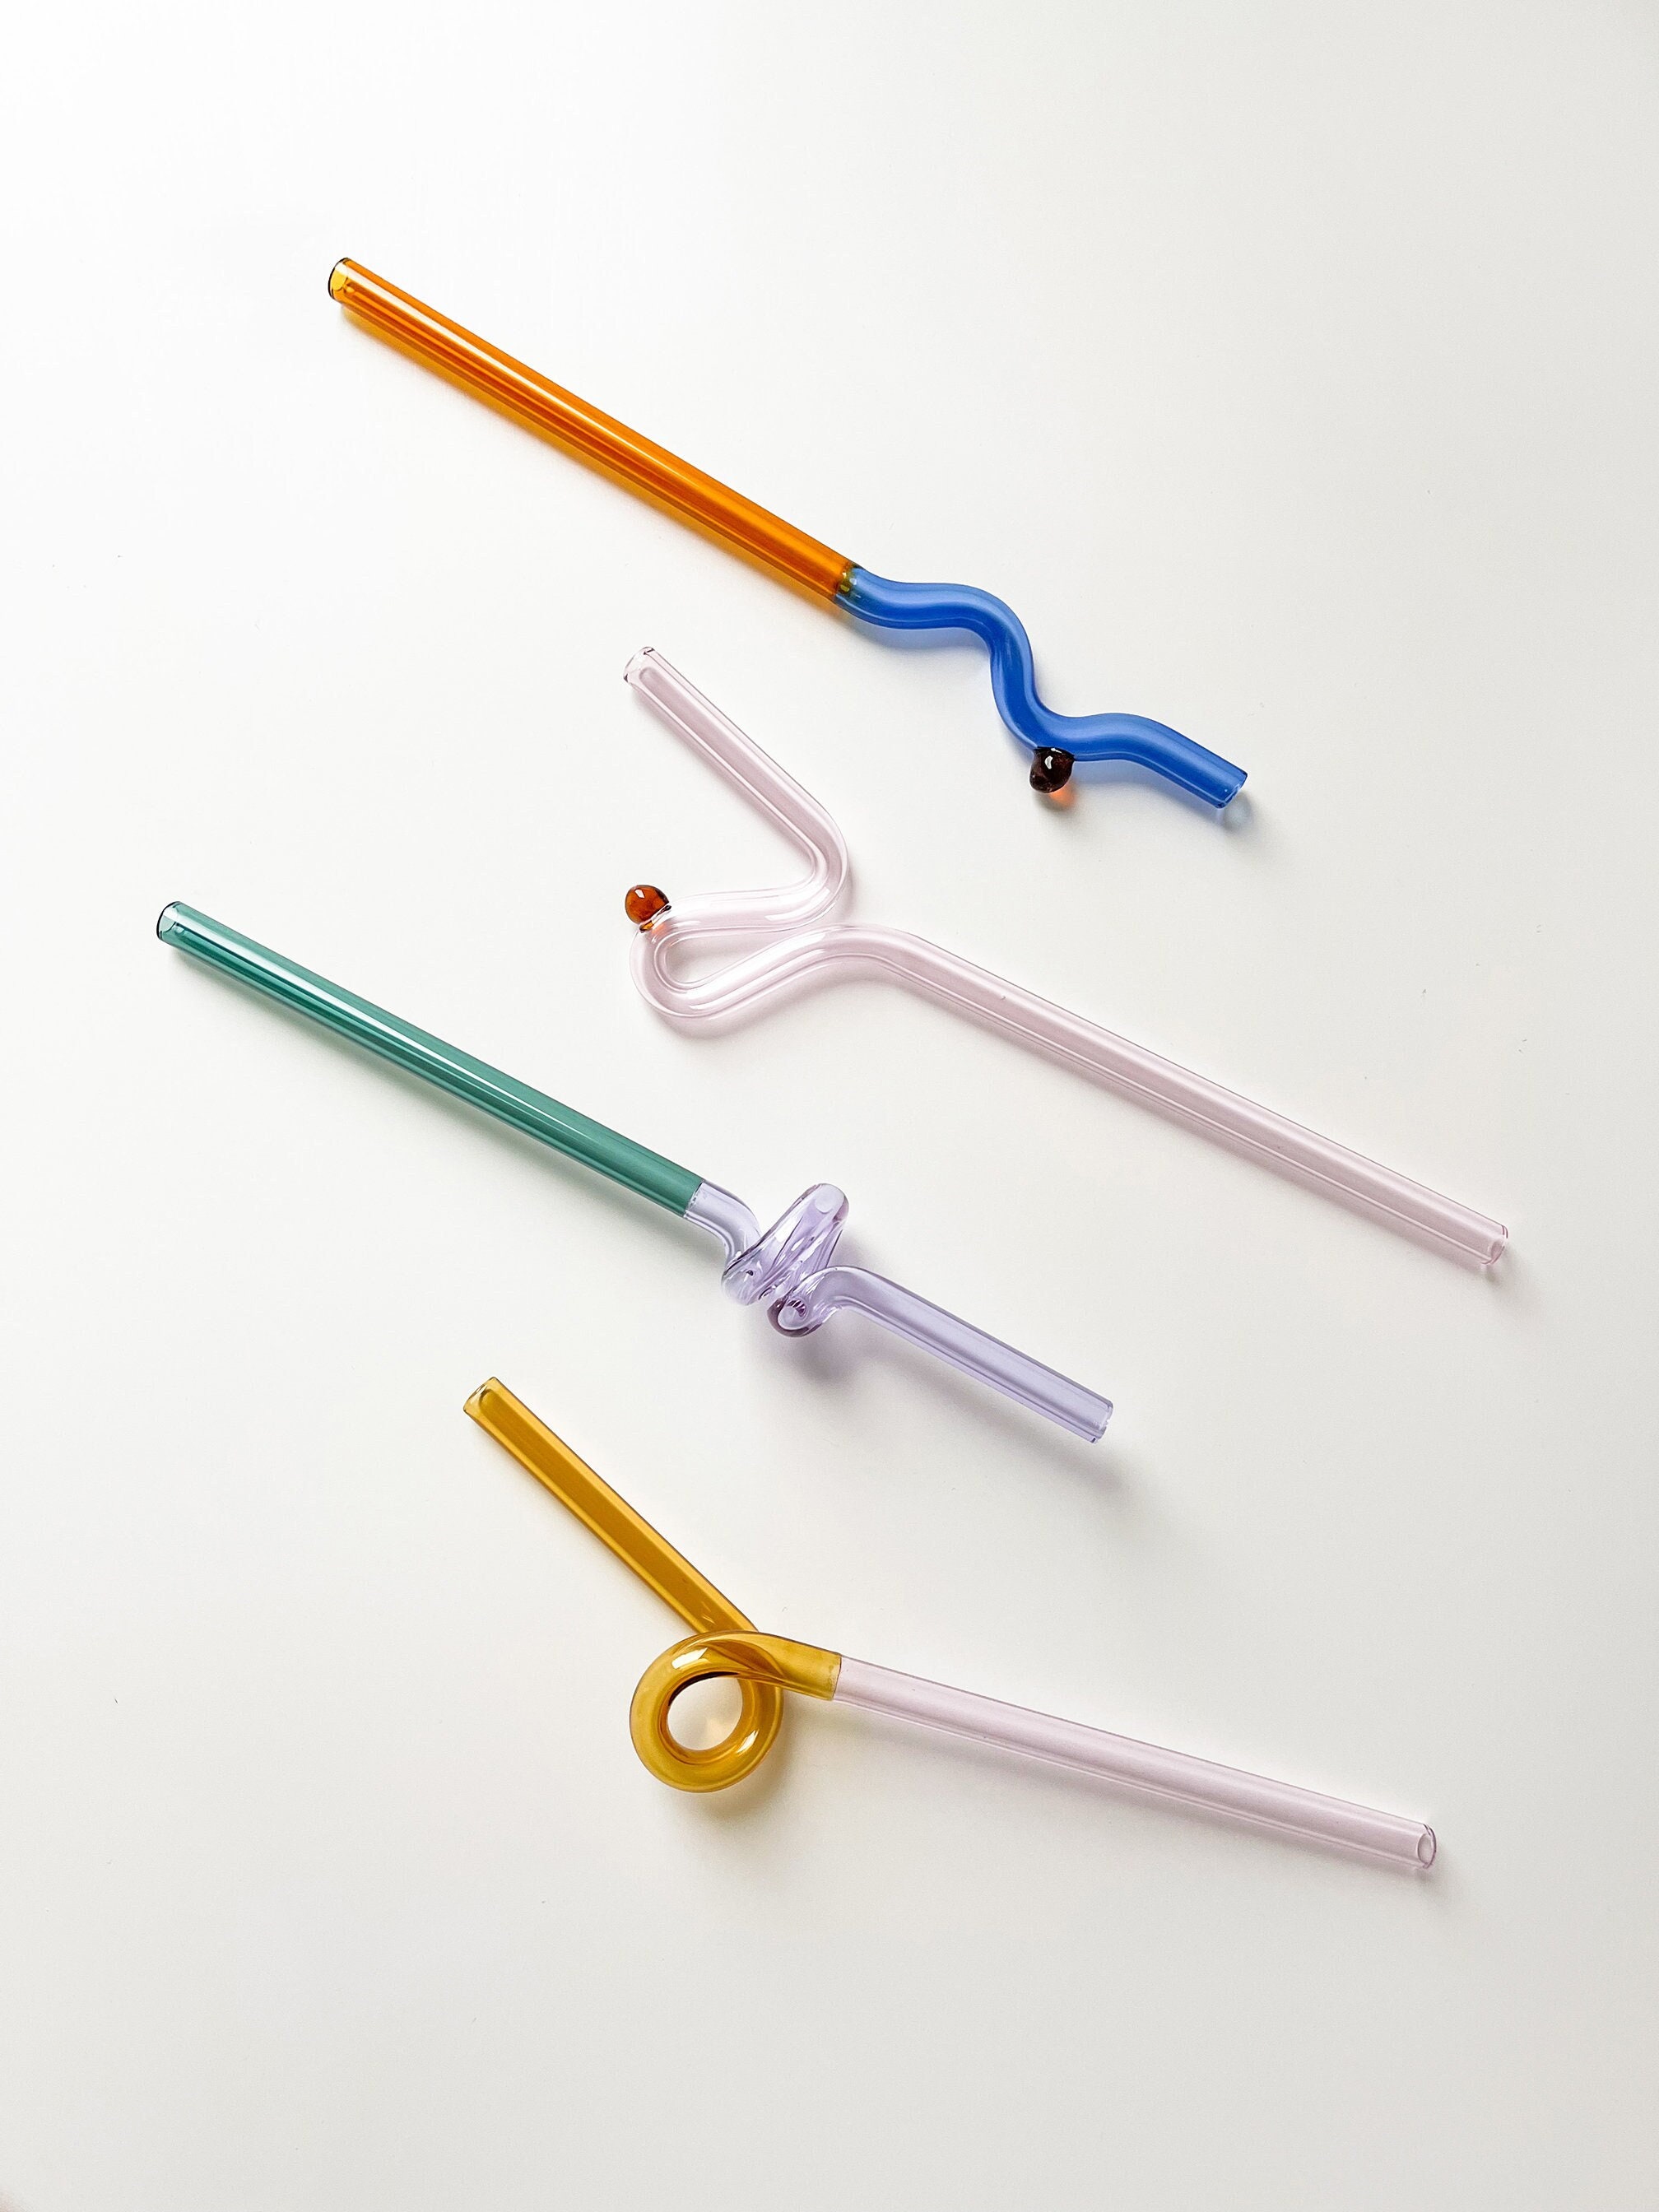 Lifehim Reusable Straws Glass Straw: 50 Pack Glass Cocktail Straws for Drinks Thick Drinking Straws Small Clear Straws Reusable Straws Dishwasher Safe